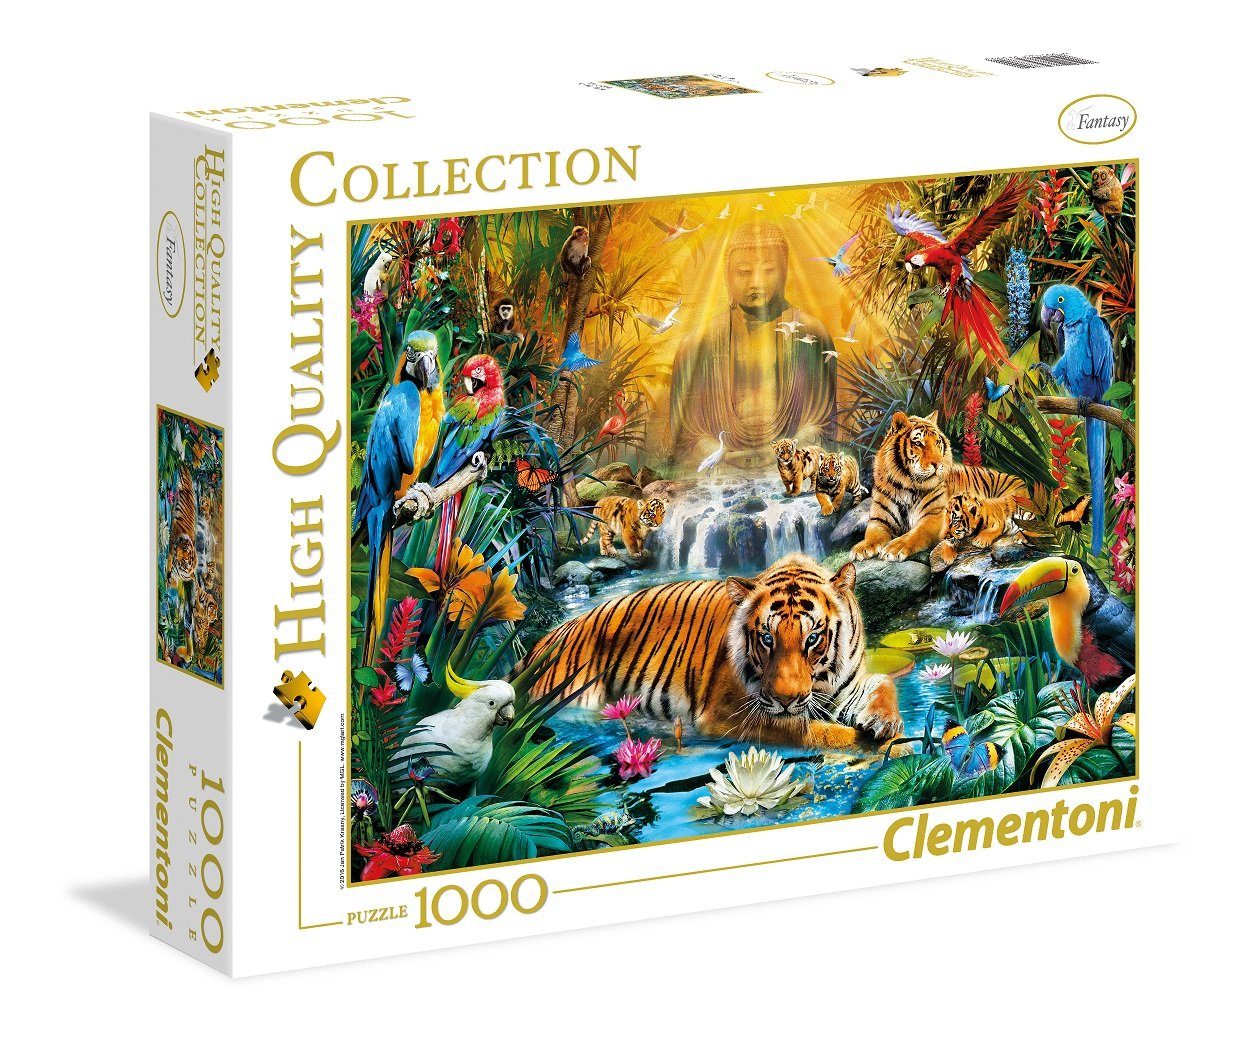 501 in Teile Puzzle Clem-39380, Clementoni® Made Puzzles Europe Puzzleteile, 1000 bis